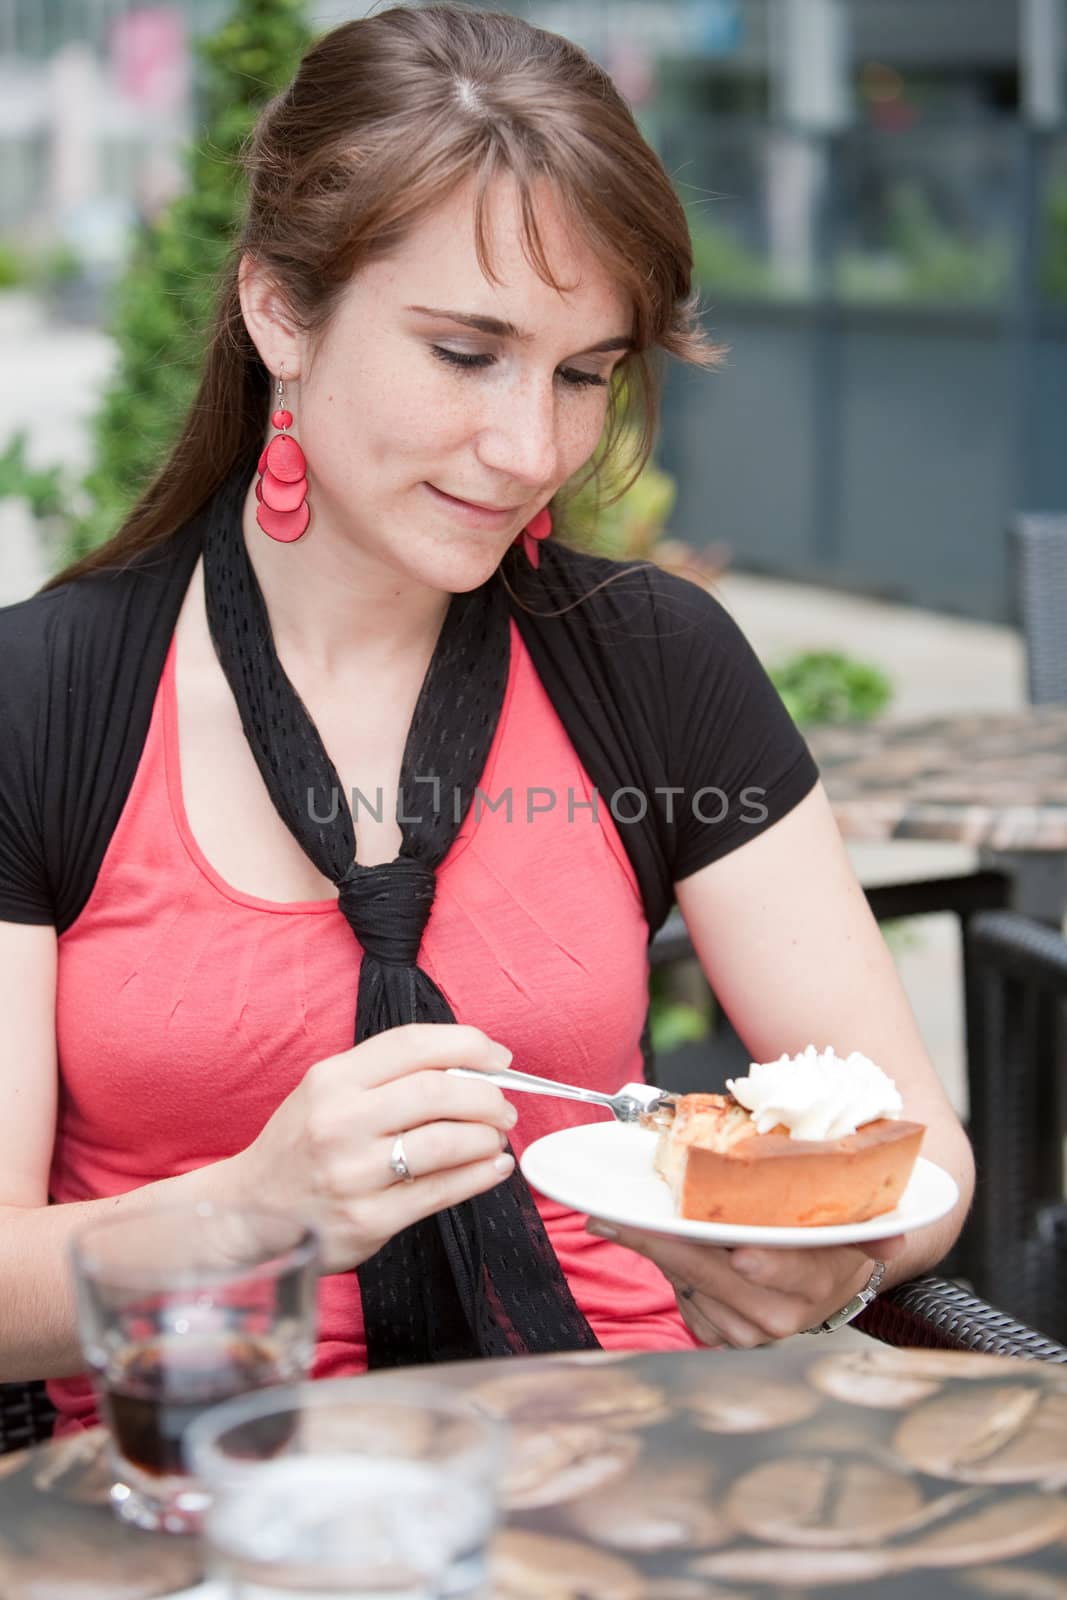 Attractive young woman eating apple pie by Fotosmurf